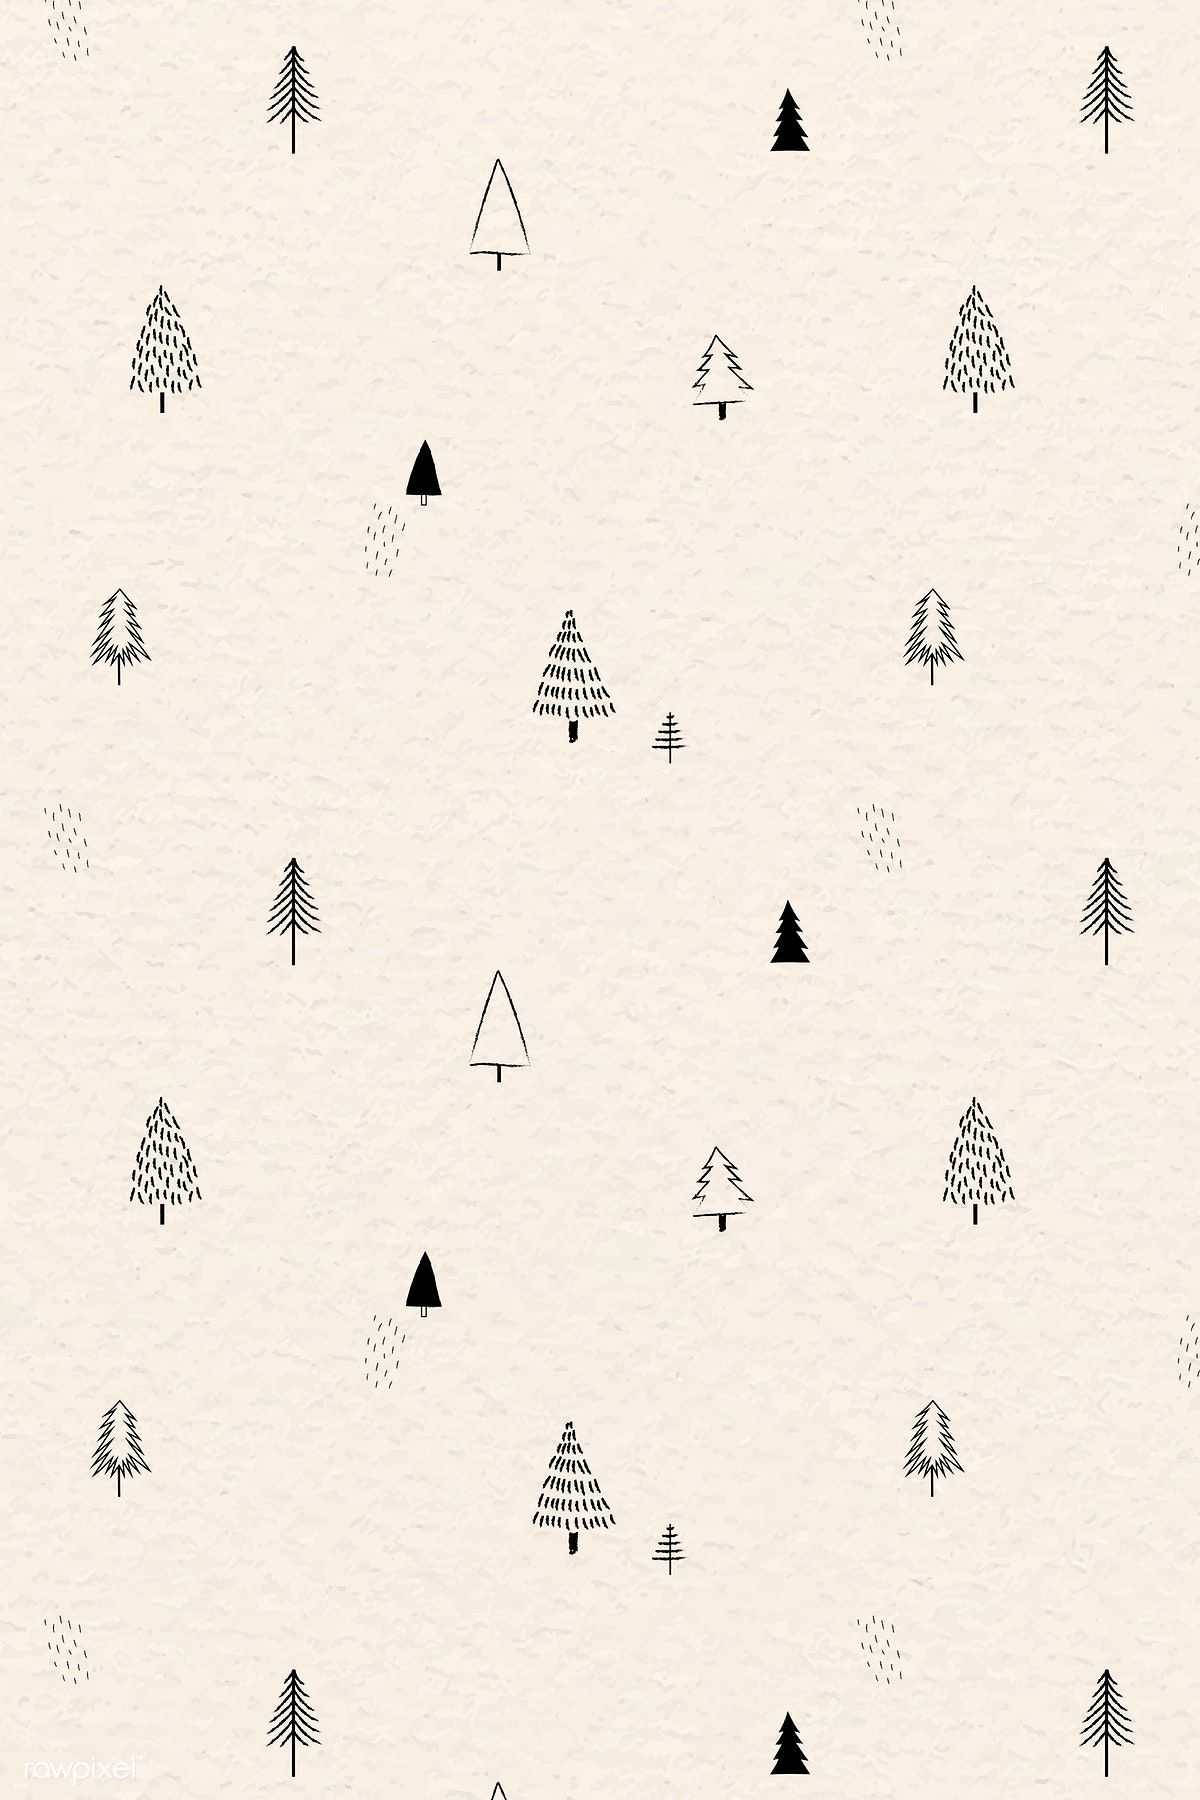 Simple Christmas Trees Doodle Wallpaper